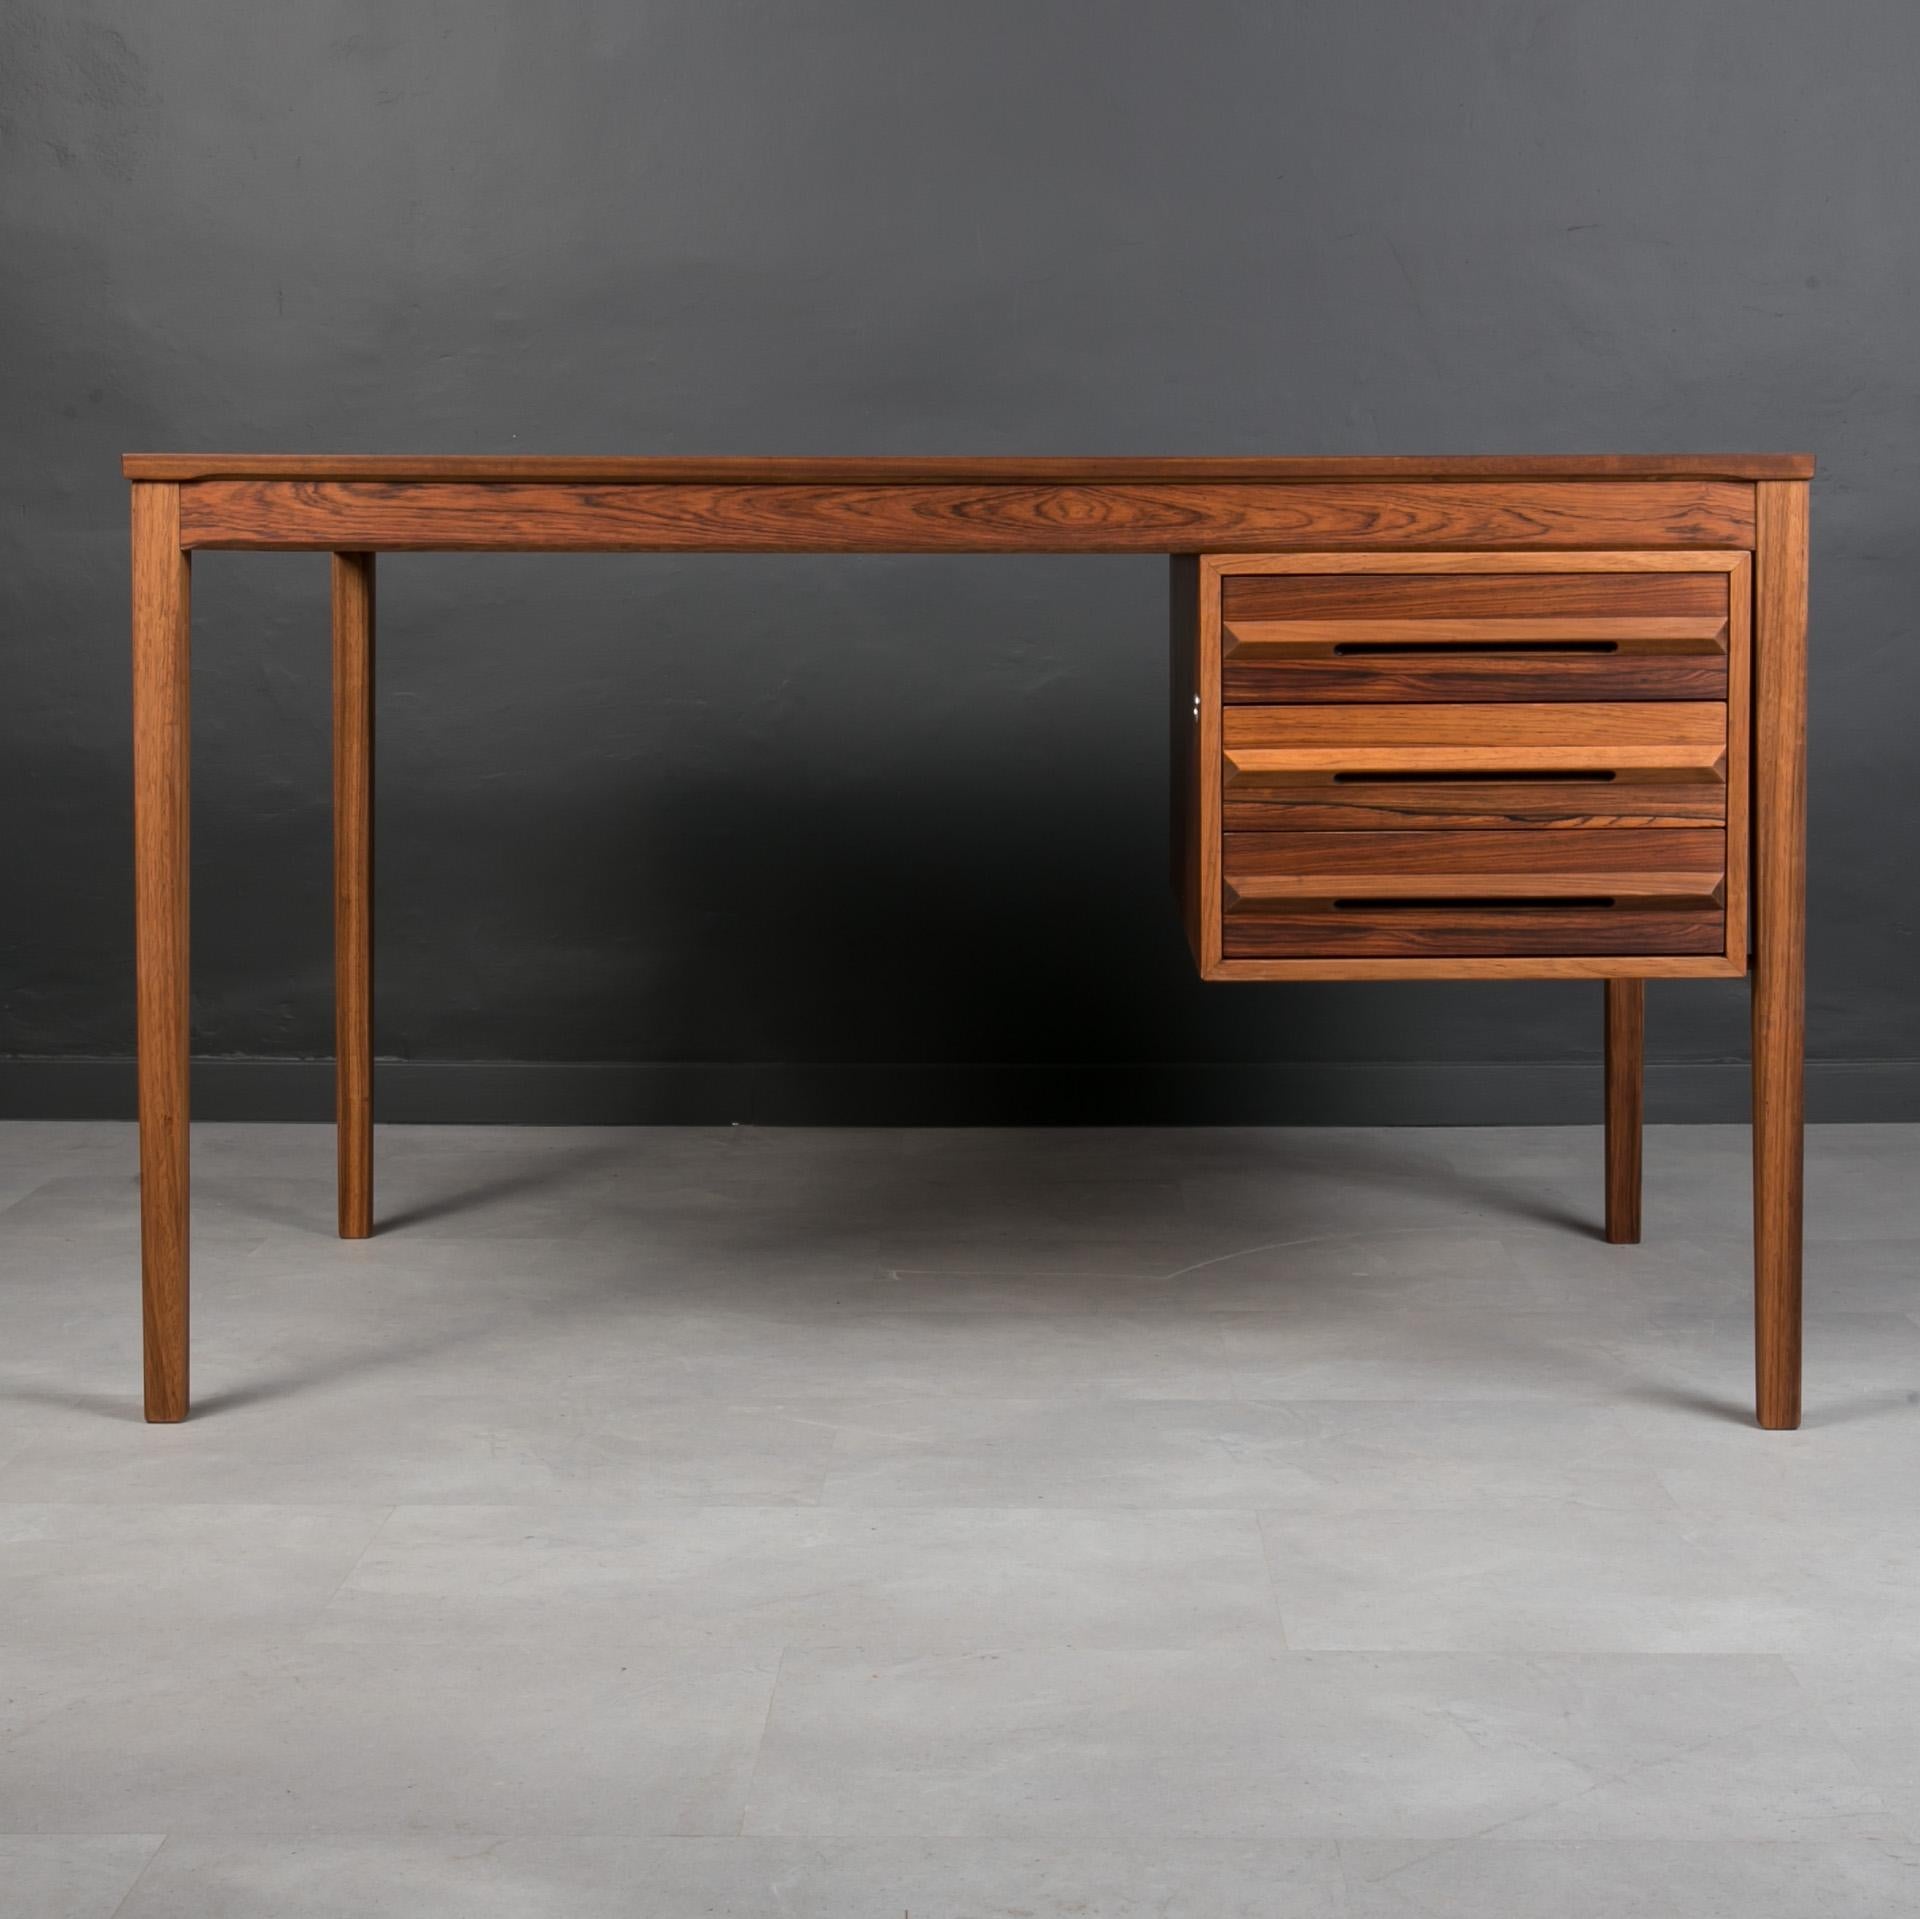 This stunning midcentury desk is a fantastic example of Torbjorn Afdal style, one of the most-appreciated Norwegian designers of 20th century. It was most probably produced by Bruksbo manufactory around 1960s. Pure in form yet very impressive. The